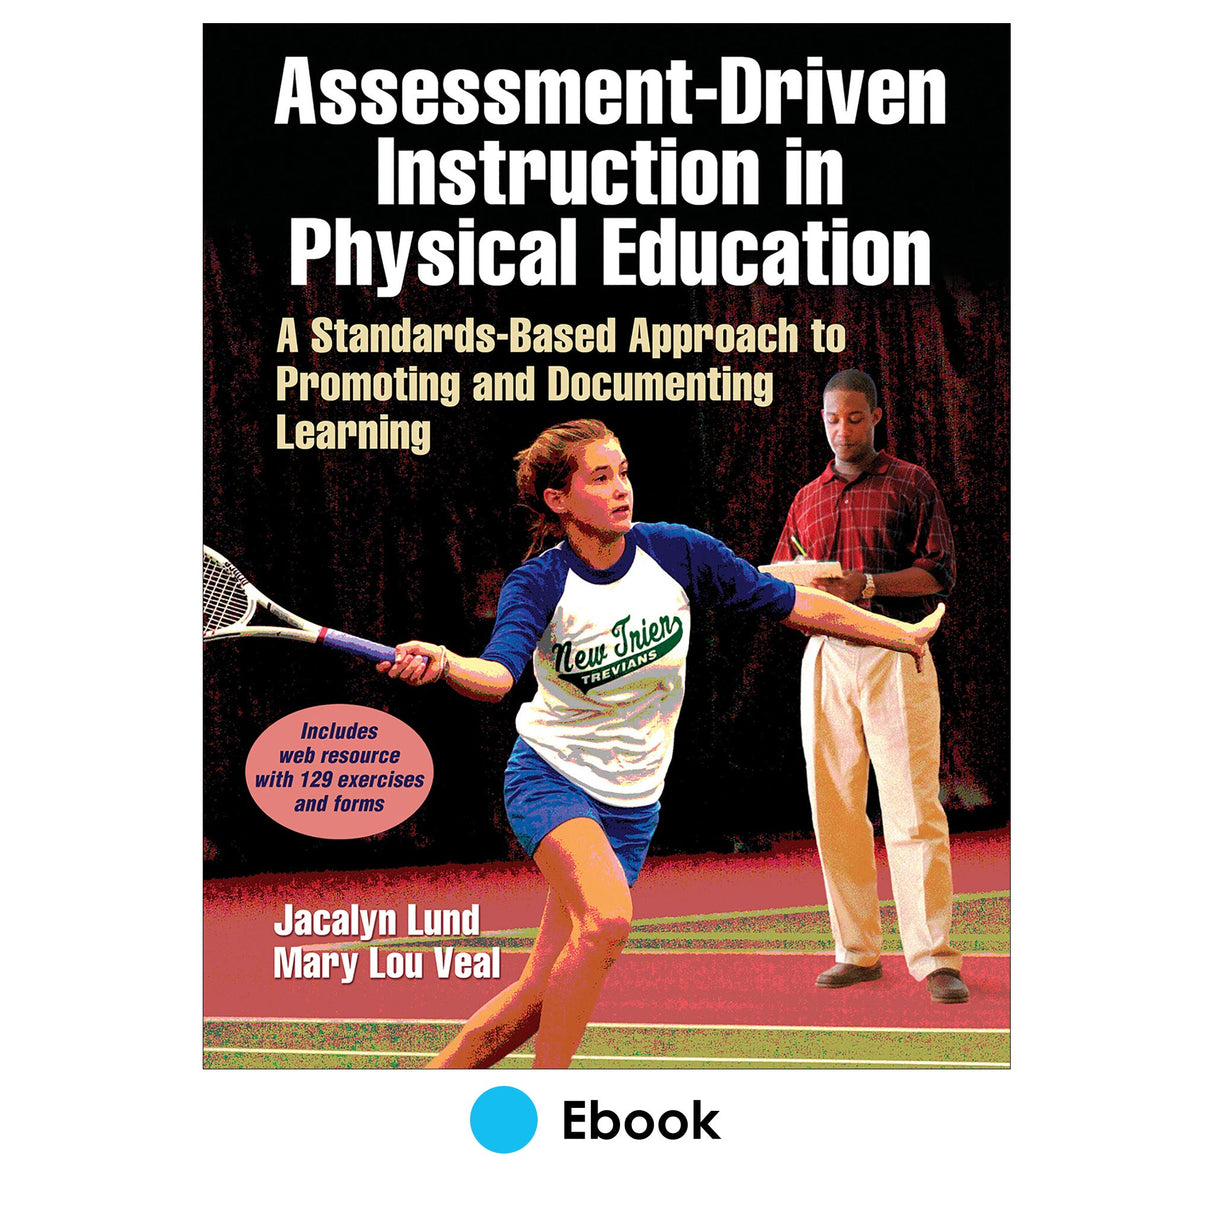 Assessment-Driven Instruction in Physical Education PDF